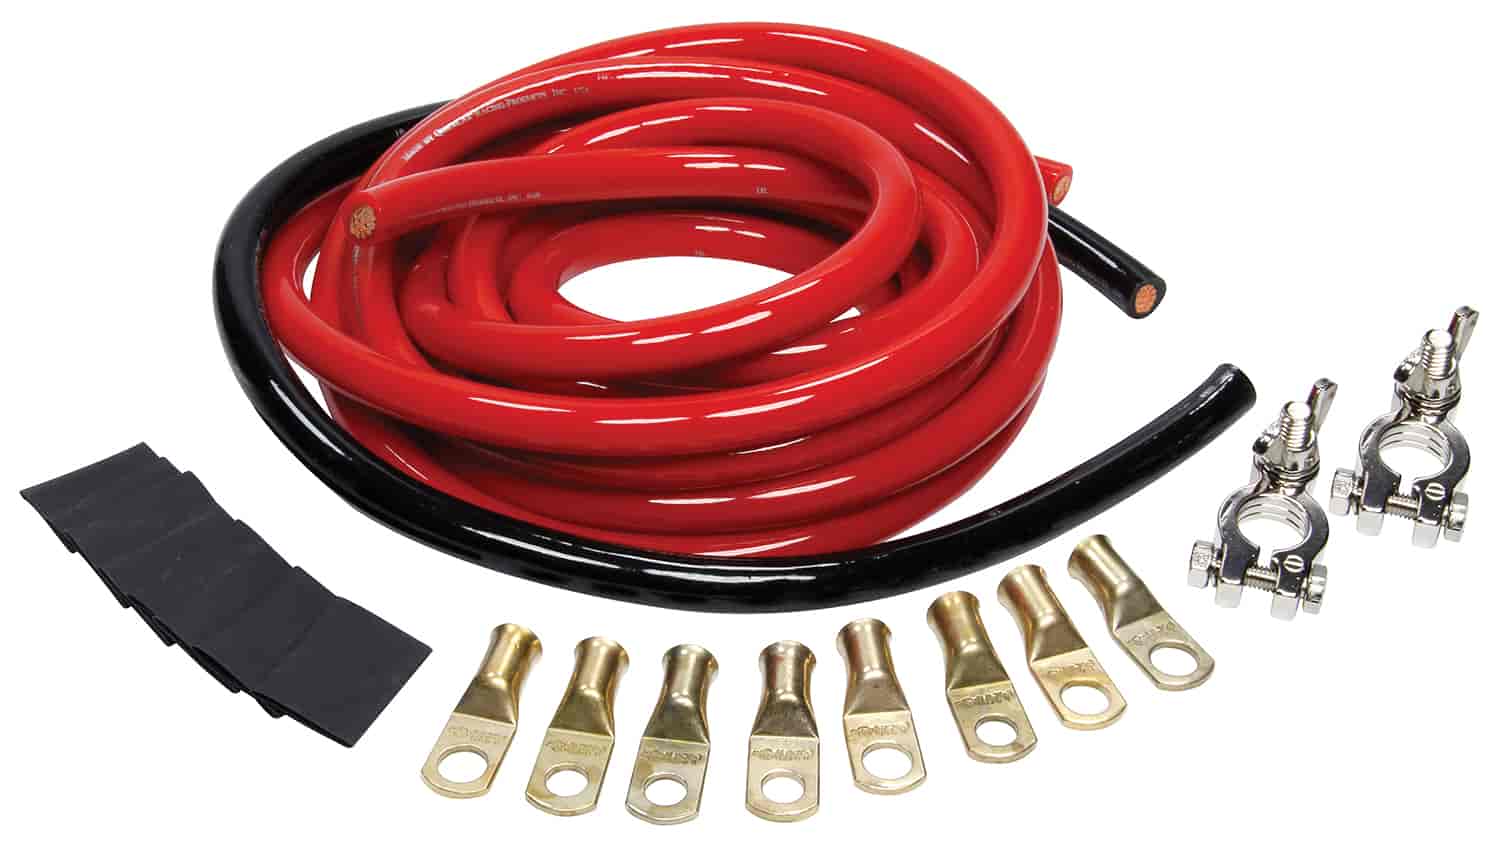 Battery Cable Kit 15" Red #2 Gauge power cable